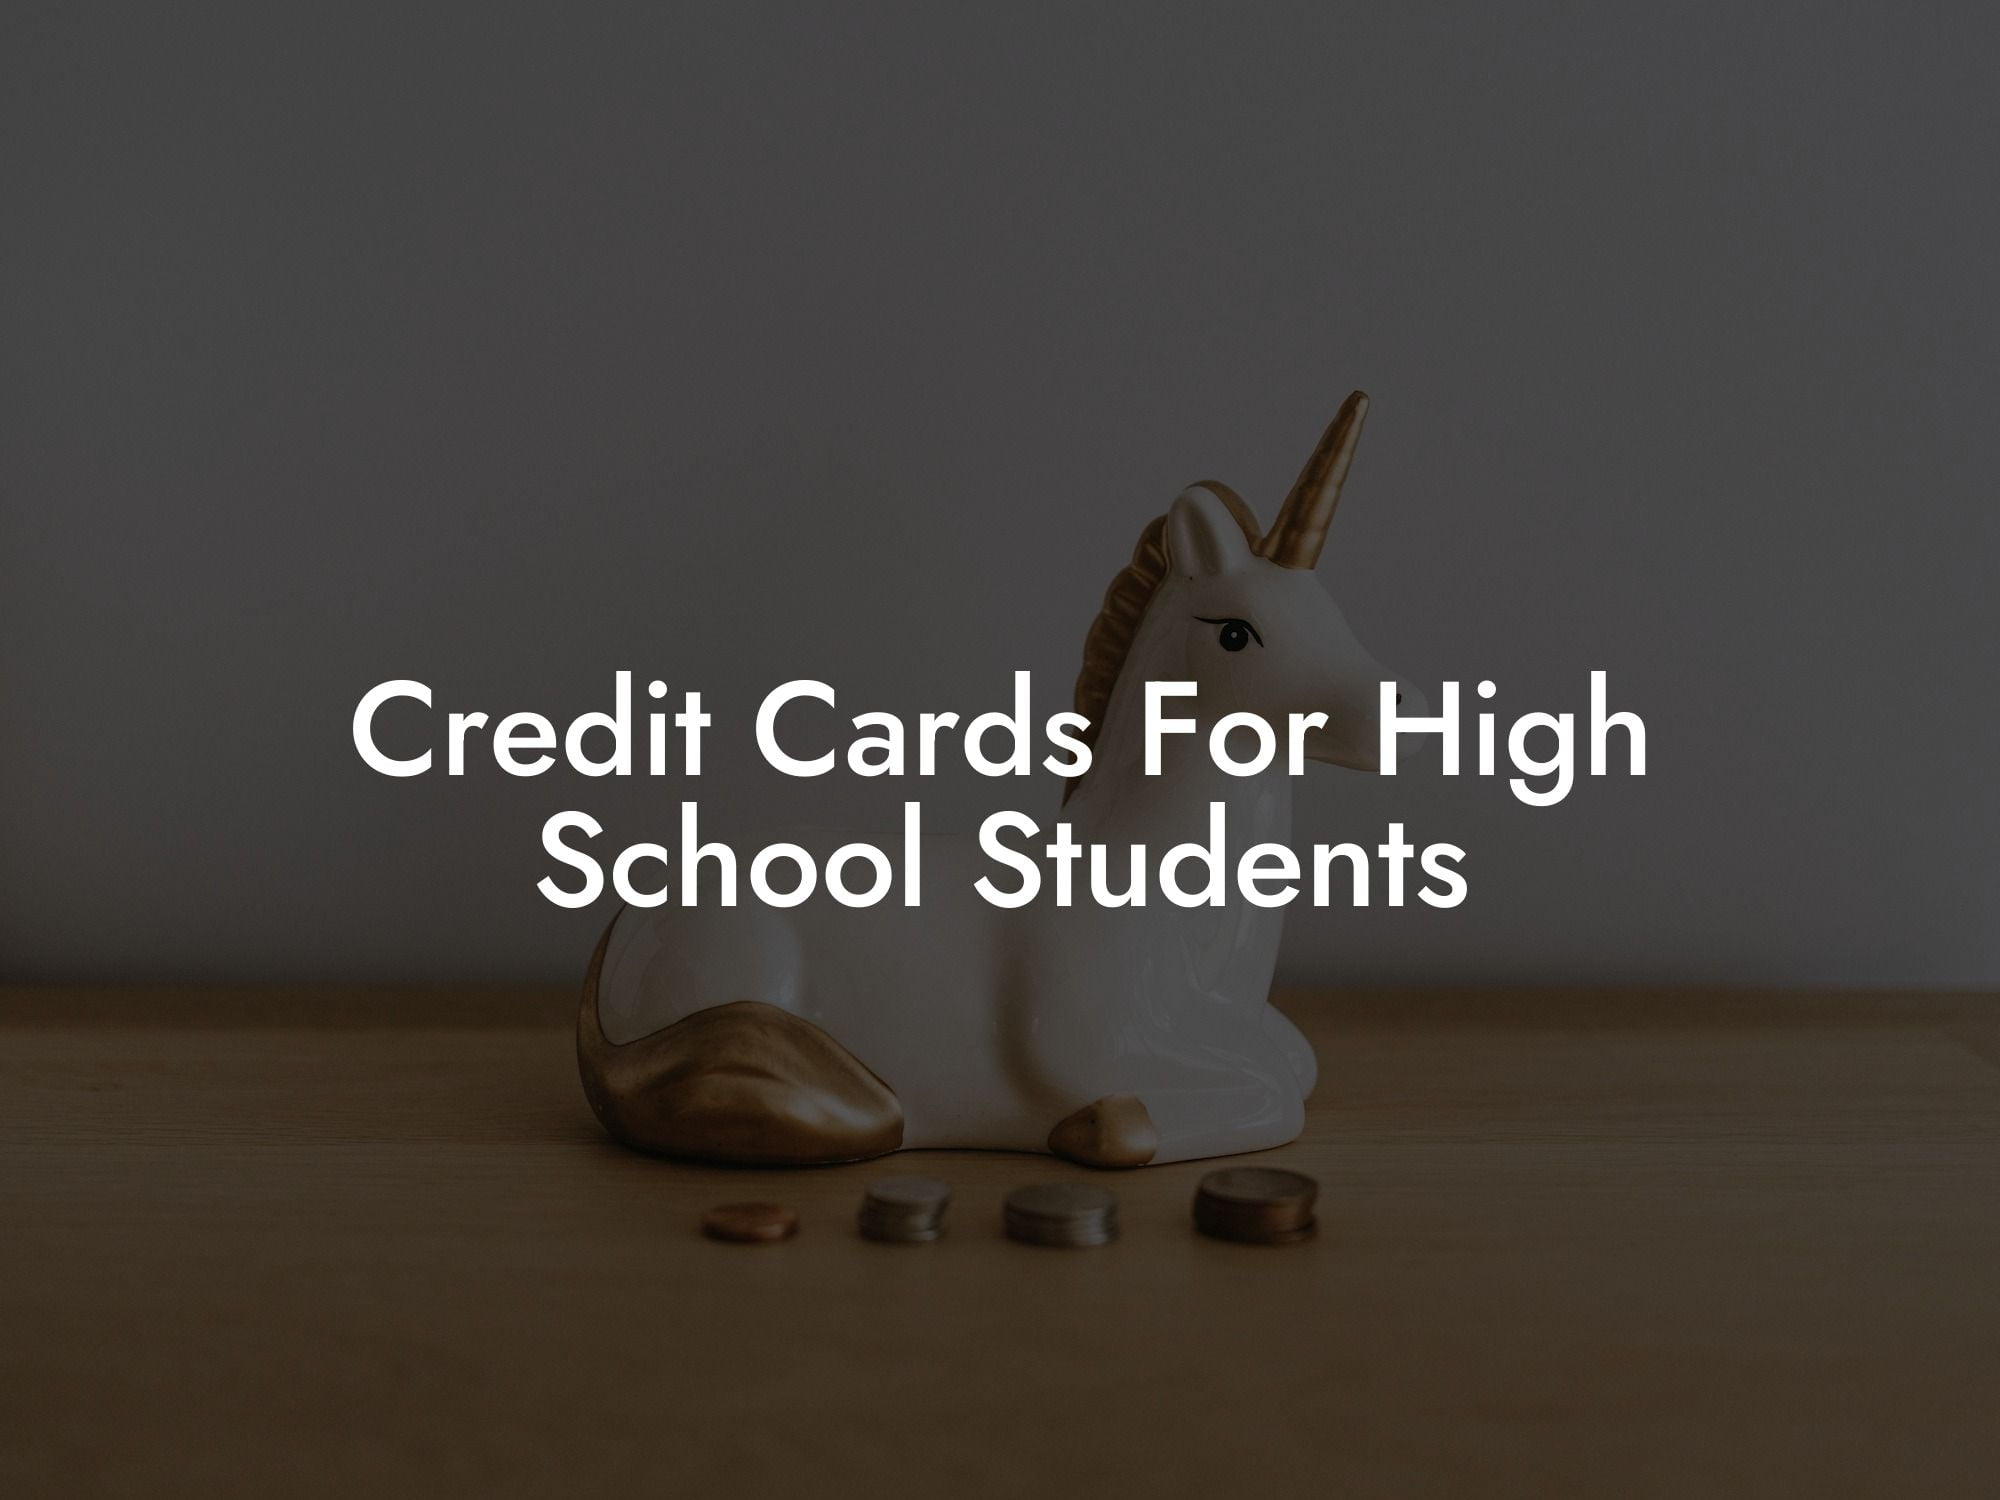 Credit Cards For High School Students